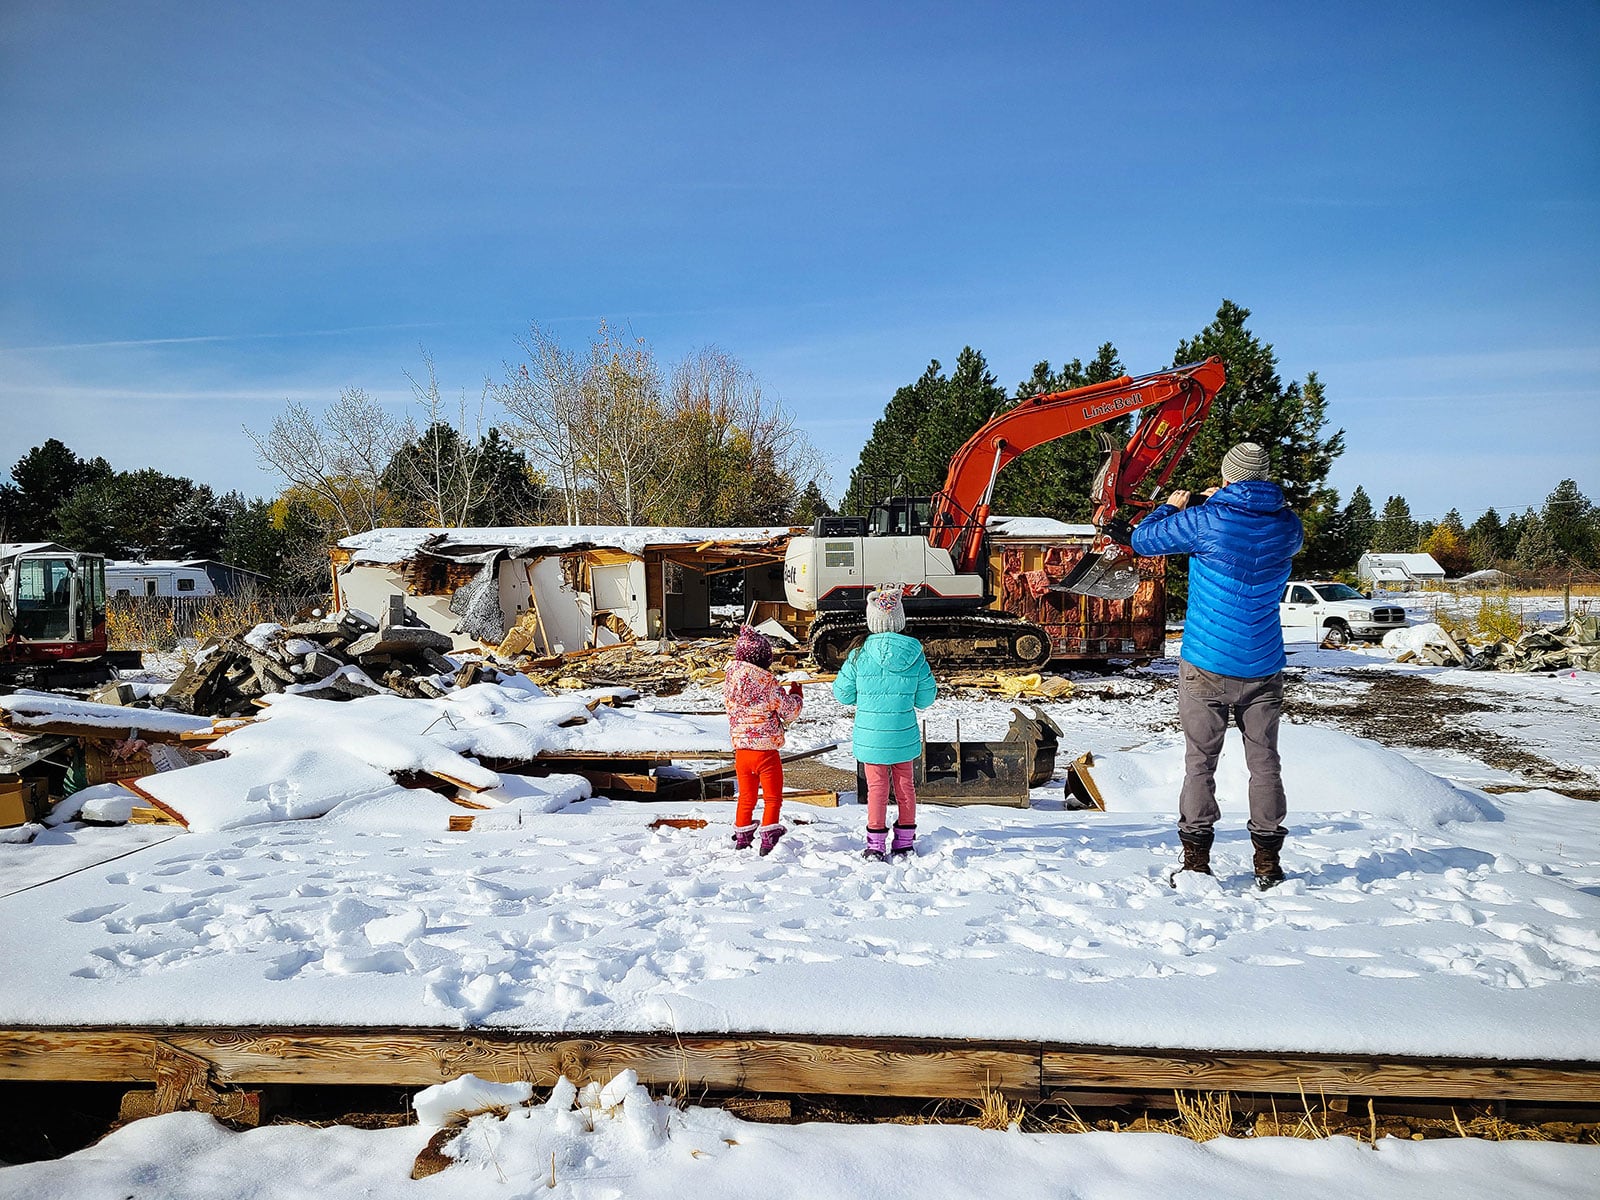 Man in blue jacket and two daughters watching a small house get demolished by an excavator in the snow